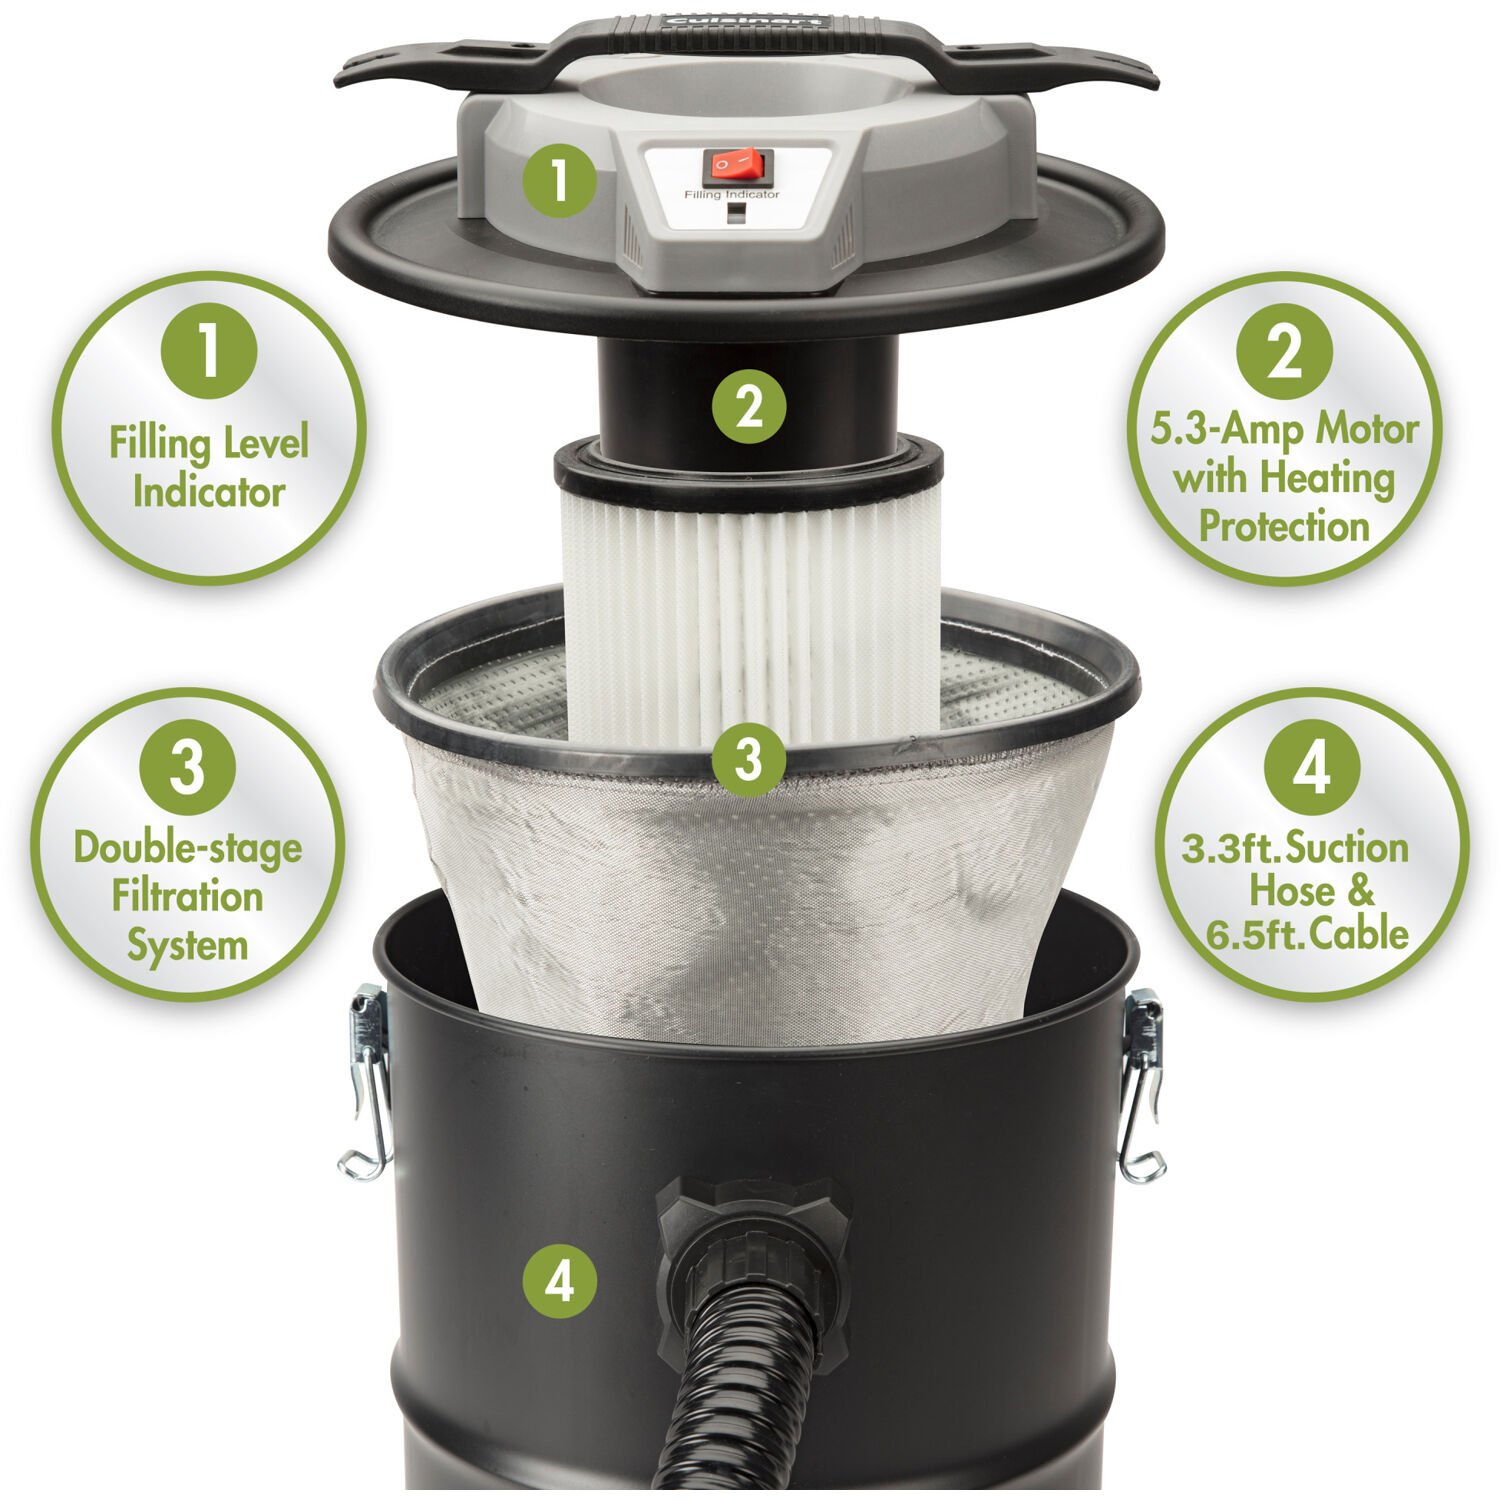 Cuisinart Cold Ash Vacuum with Mutliple Cleaning Heads for BBQ Grills, Pellet Grills, Wood Stoves, Fire Pits - image 2 of 7